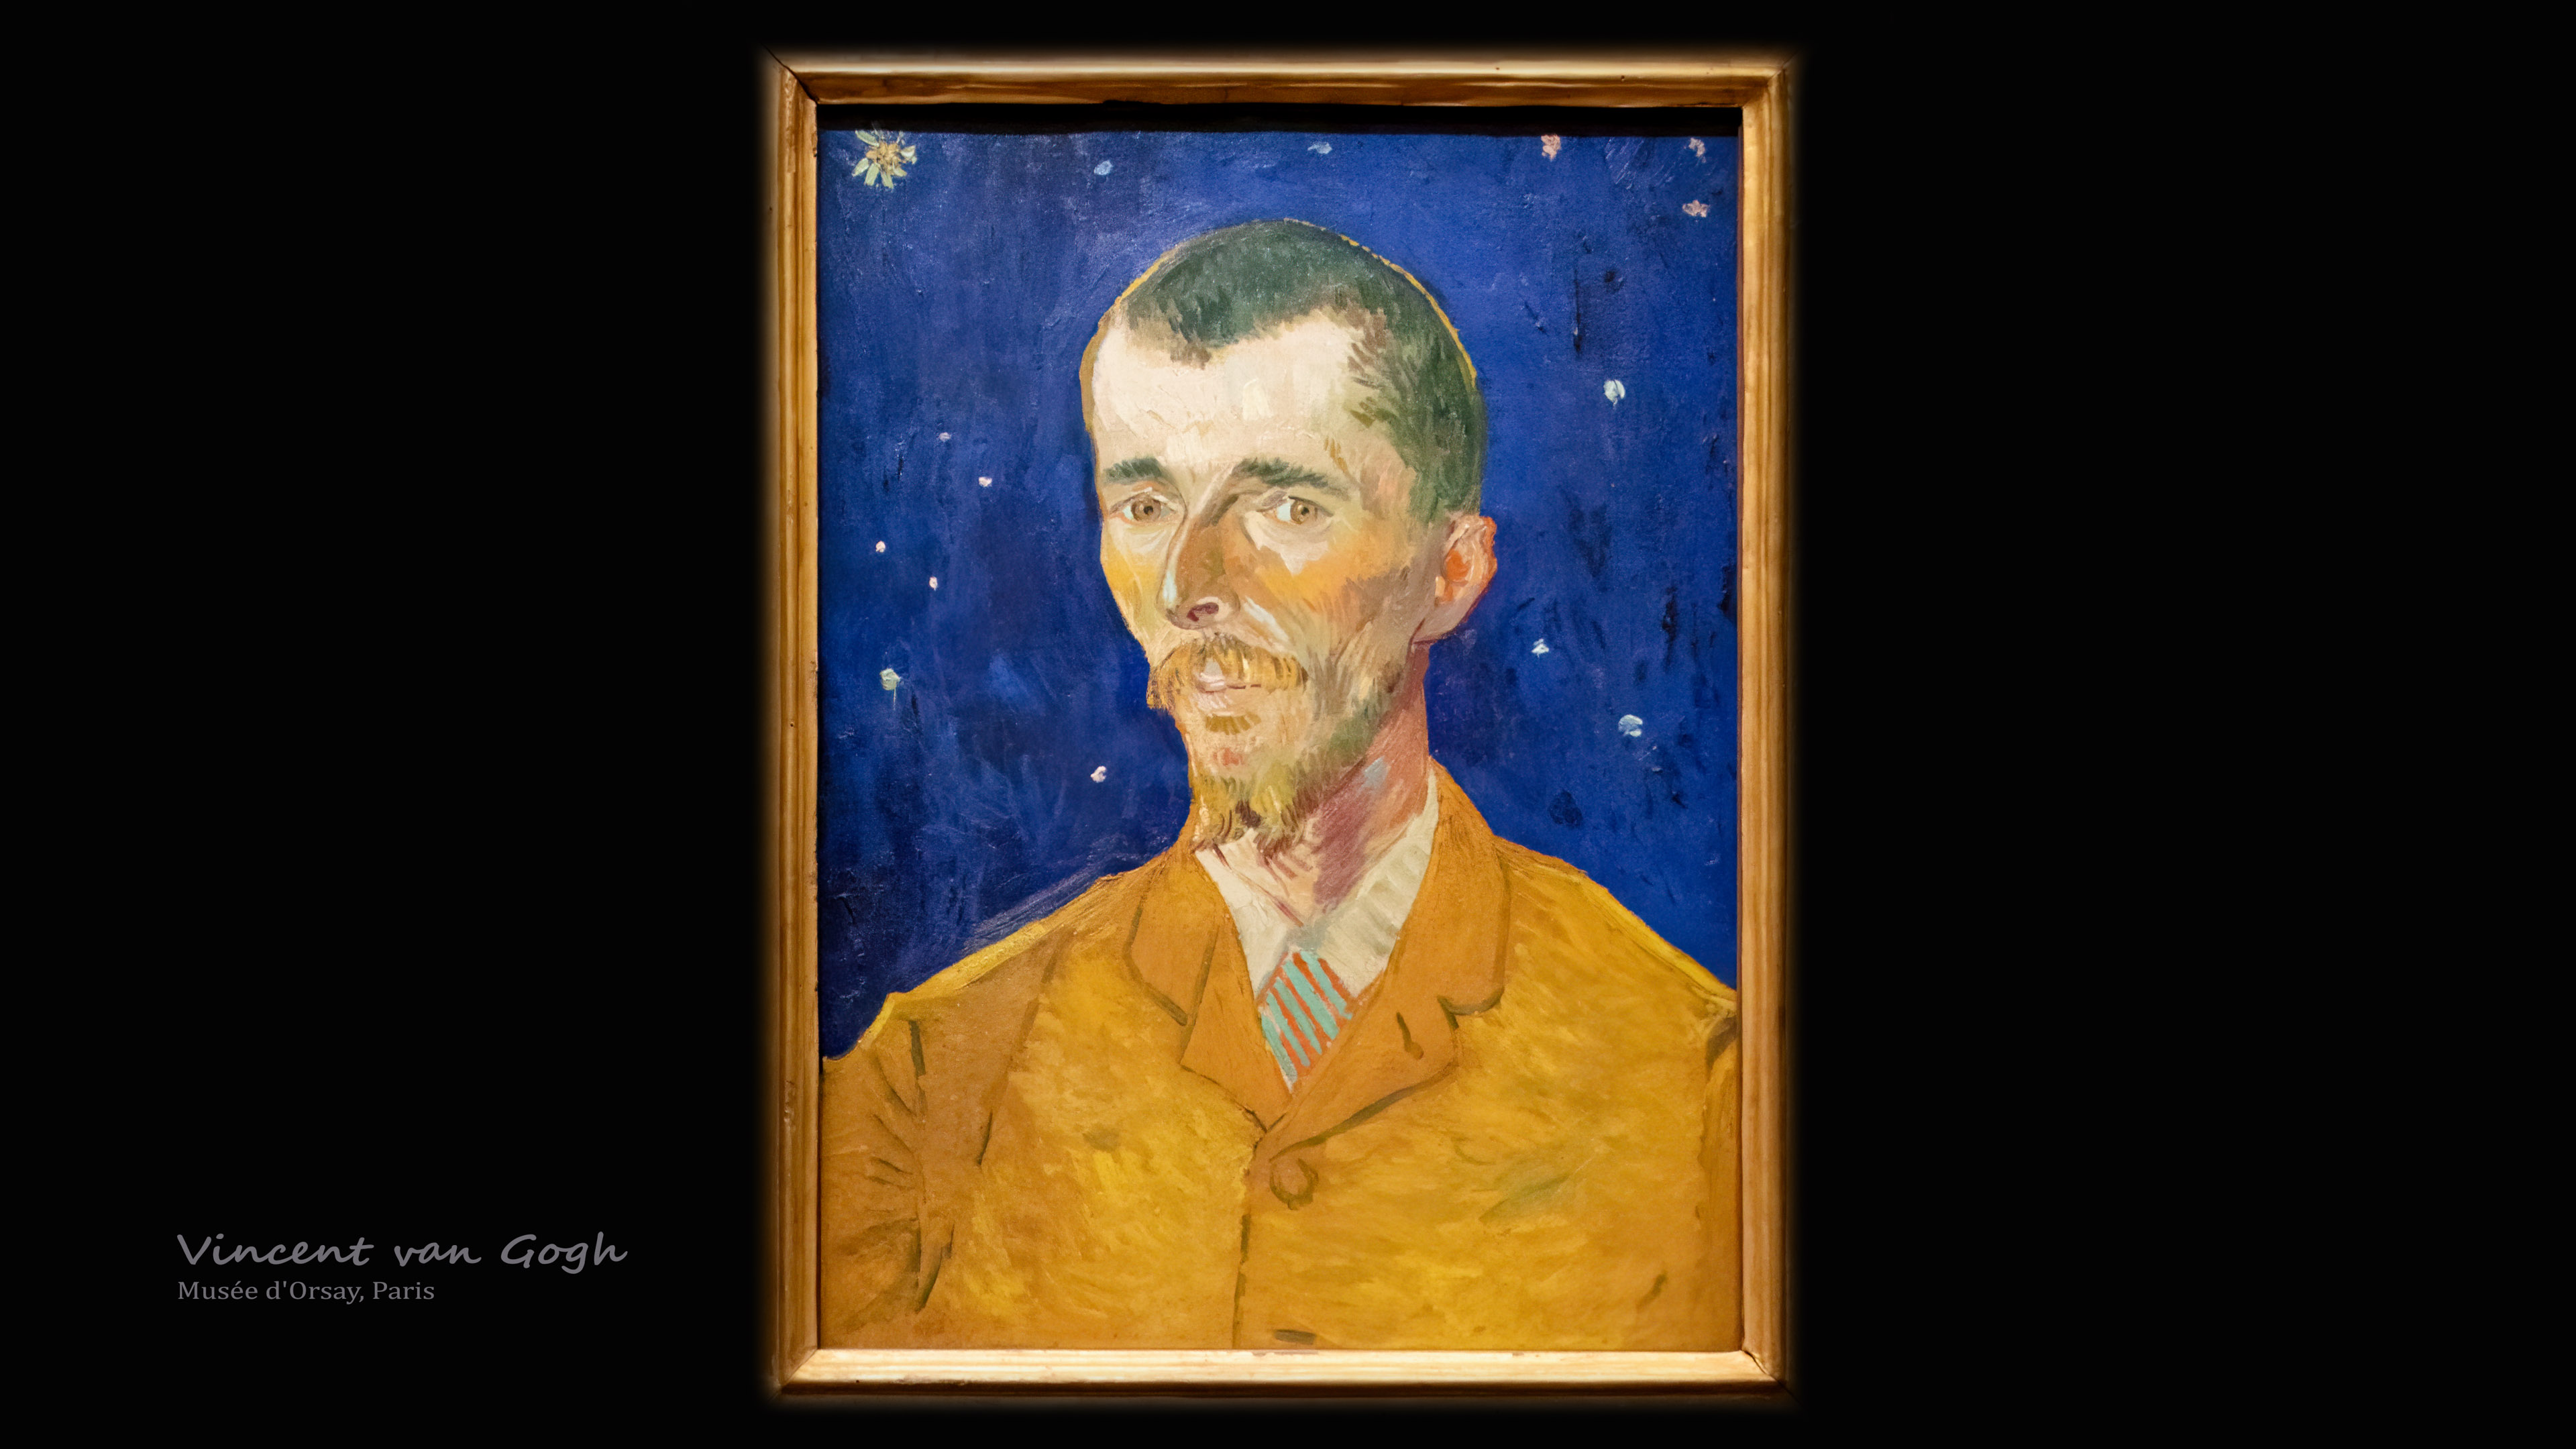 Eugène Boch Portrait at starry night wallpaper adds a touch of enigmatic allure to your PC, a free high-res download that radiates Van Gogh's portrait mastery.